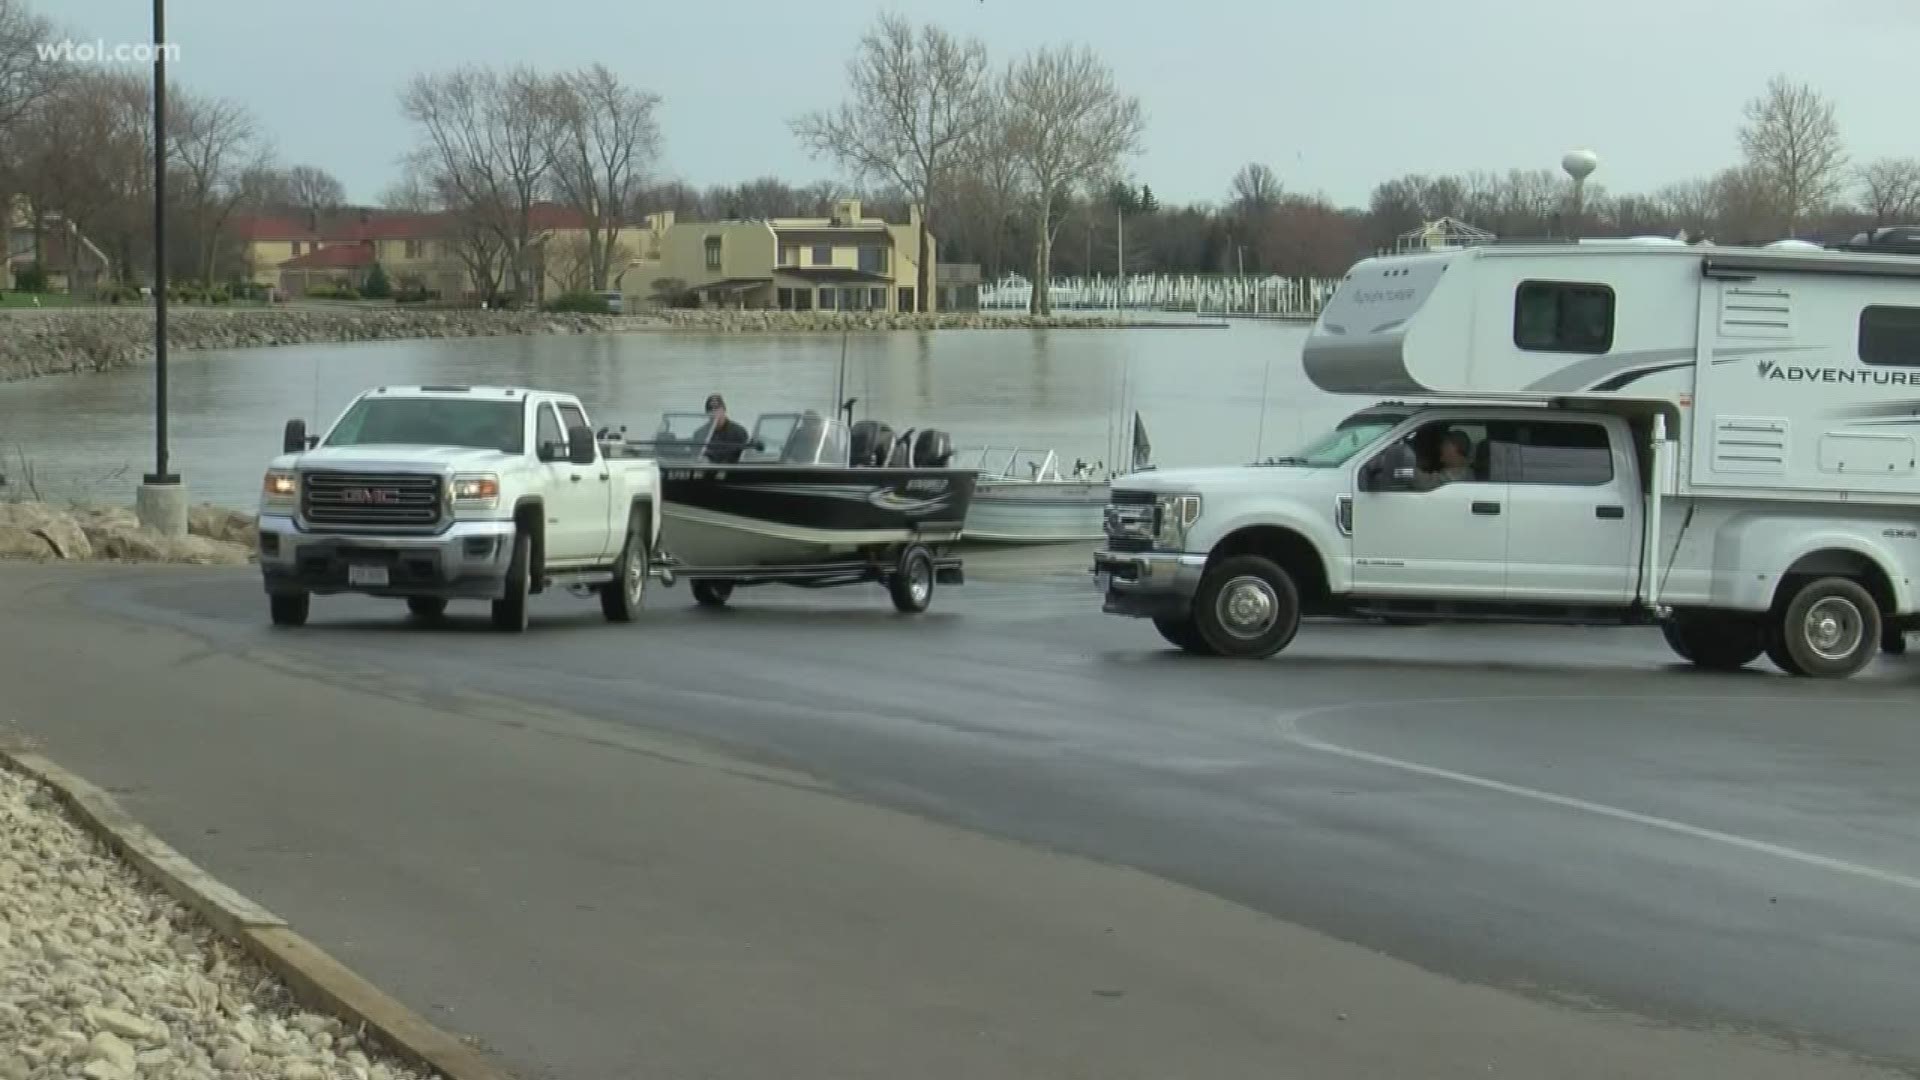 Some viewers and local officials have expressed concerns over those leaving the house to fish and possibly crowding parks and boat ramps.